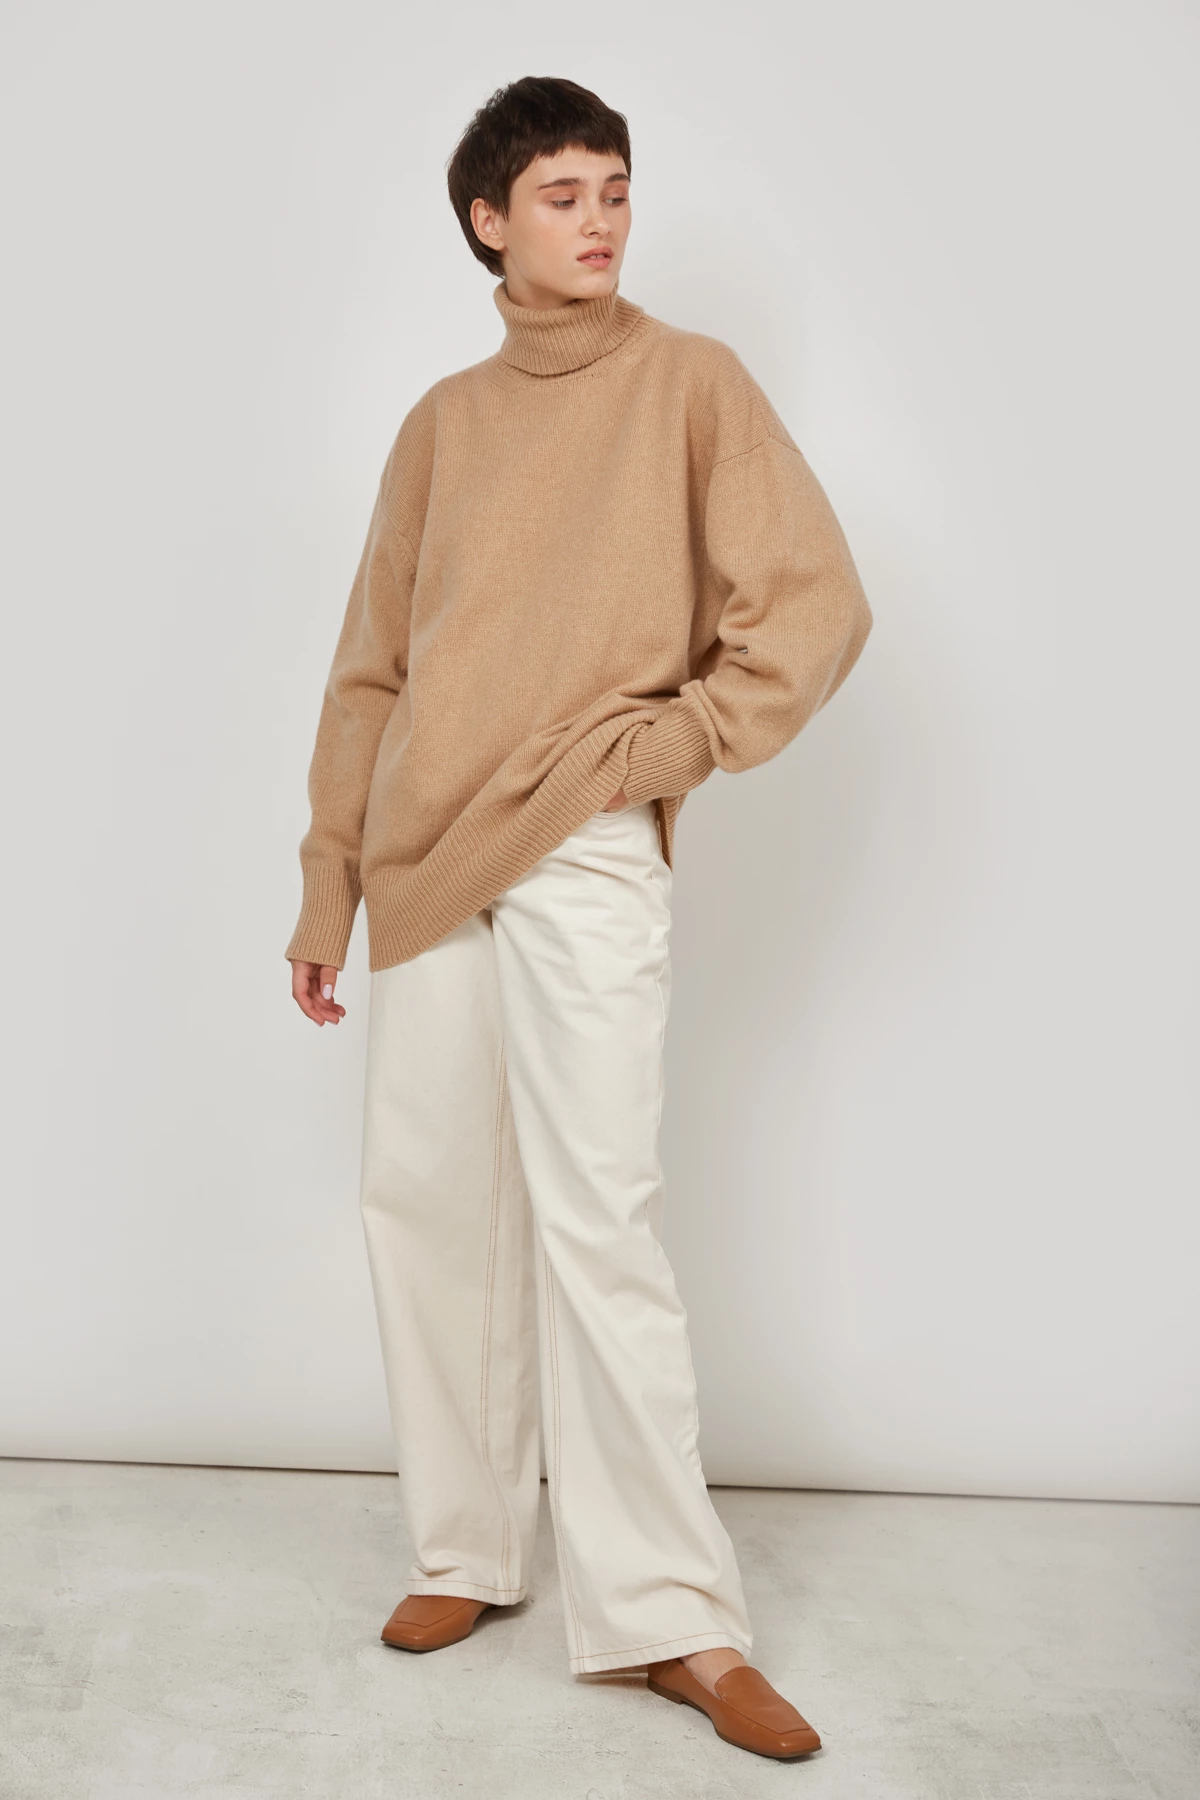 Cashmere beige knitted oversized sweater, photo 1